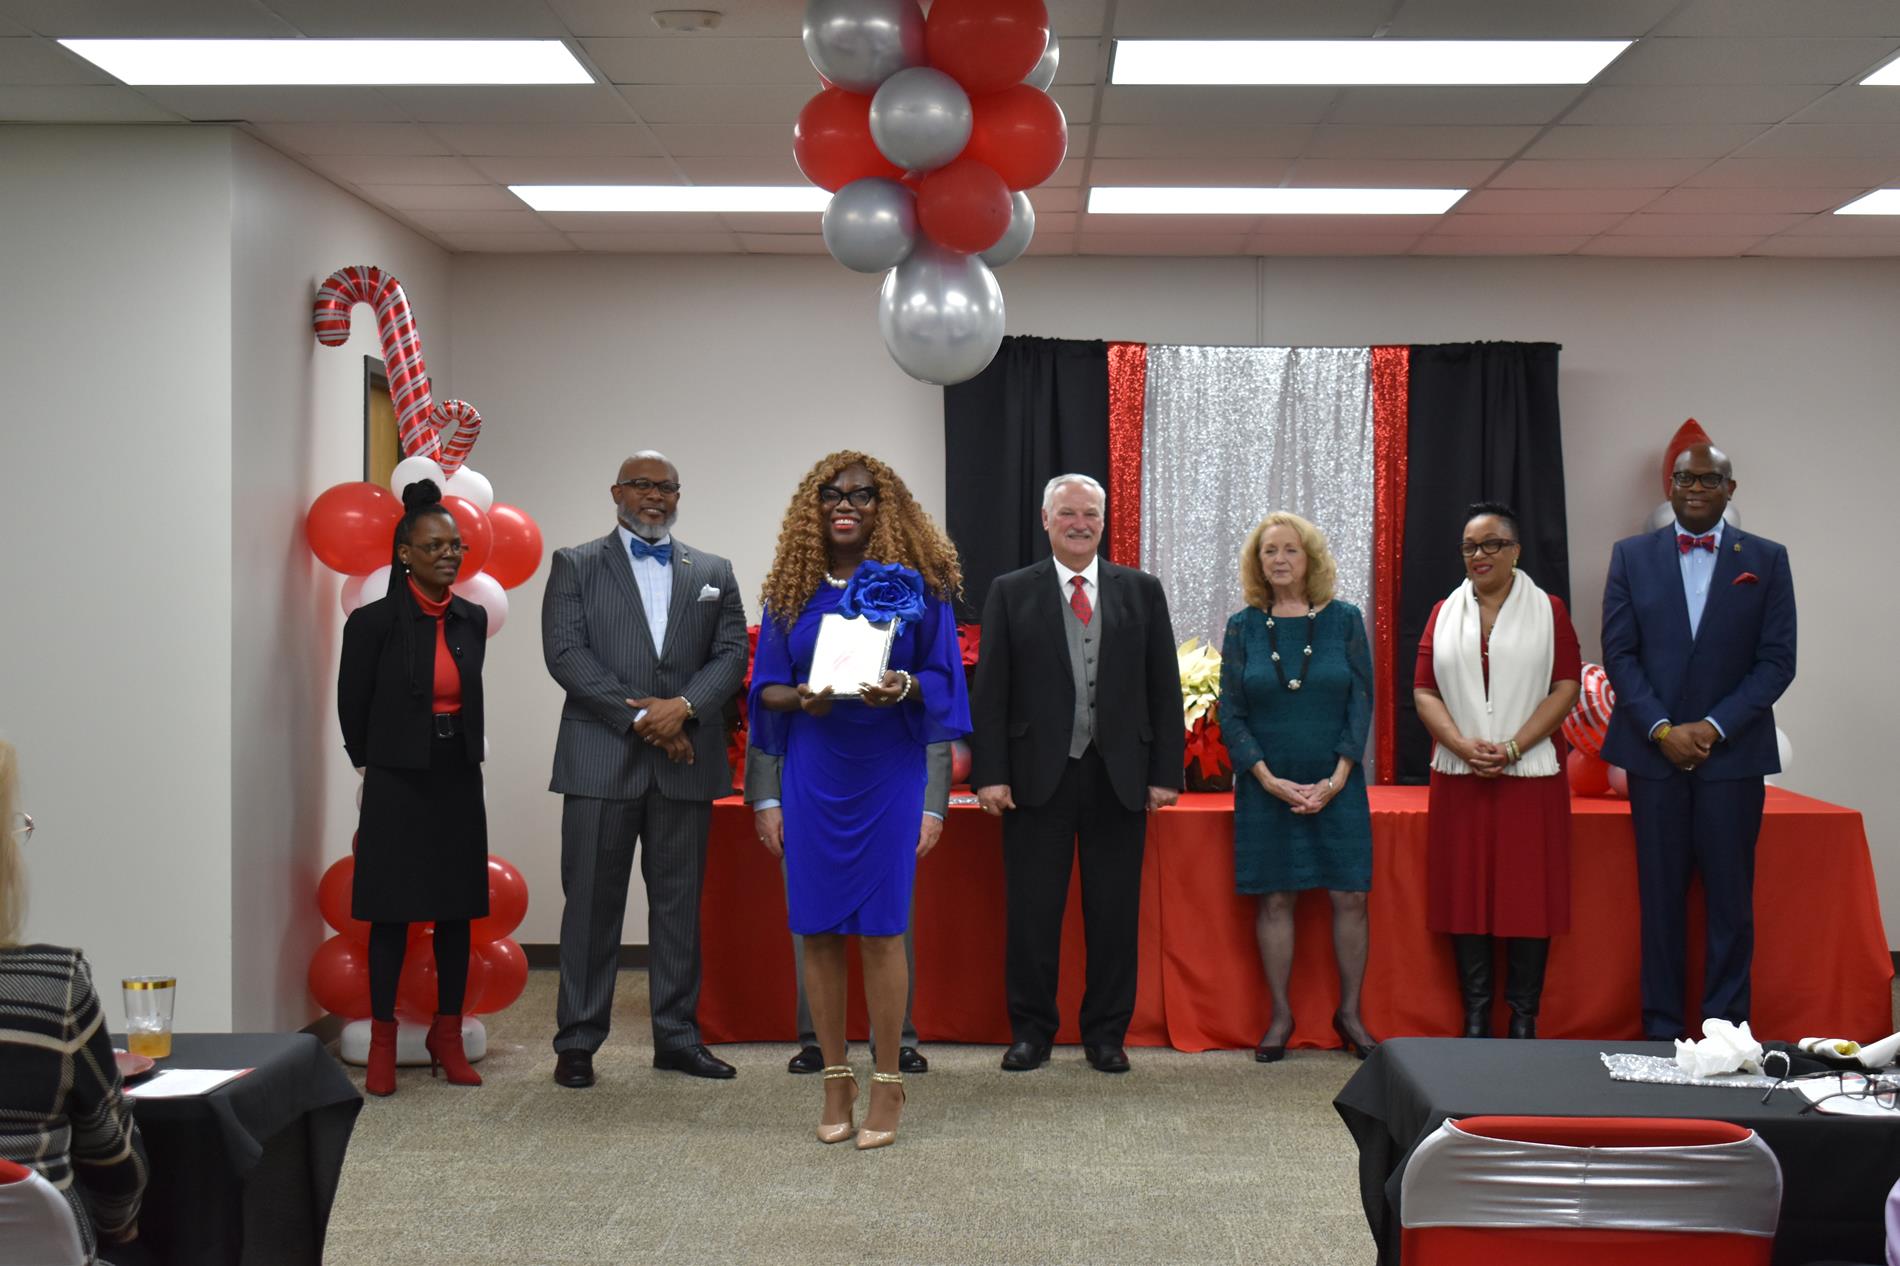 District Staff Memeber of the year being honored at the recent ceremony.